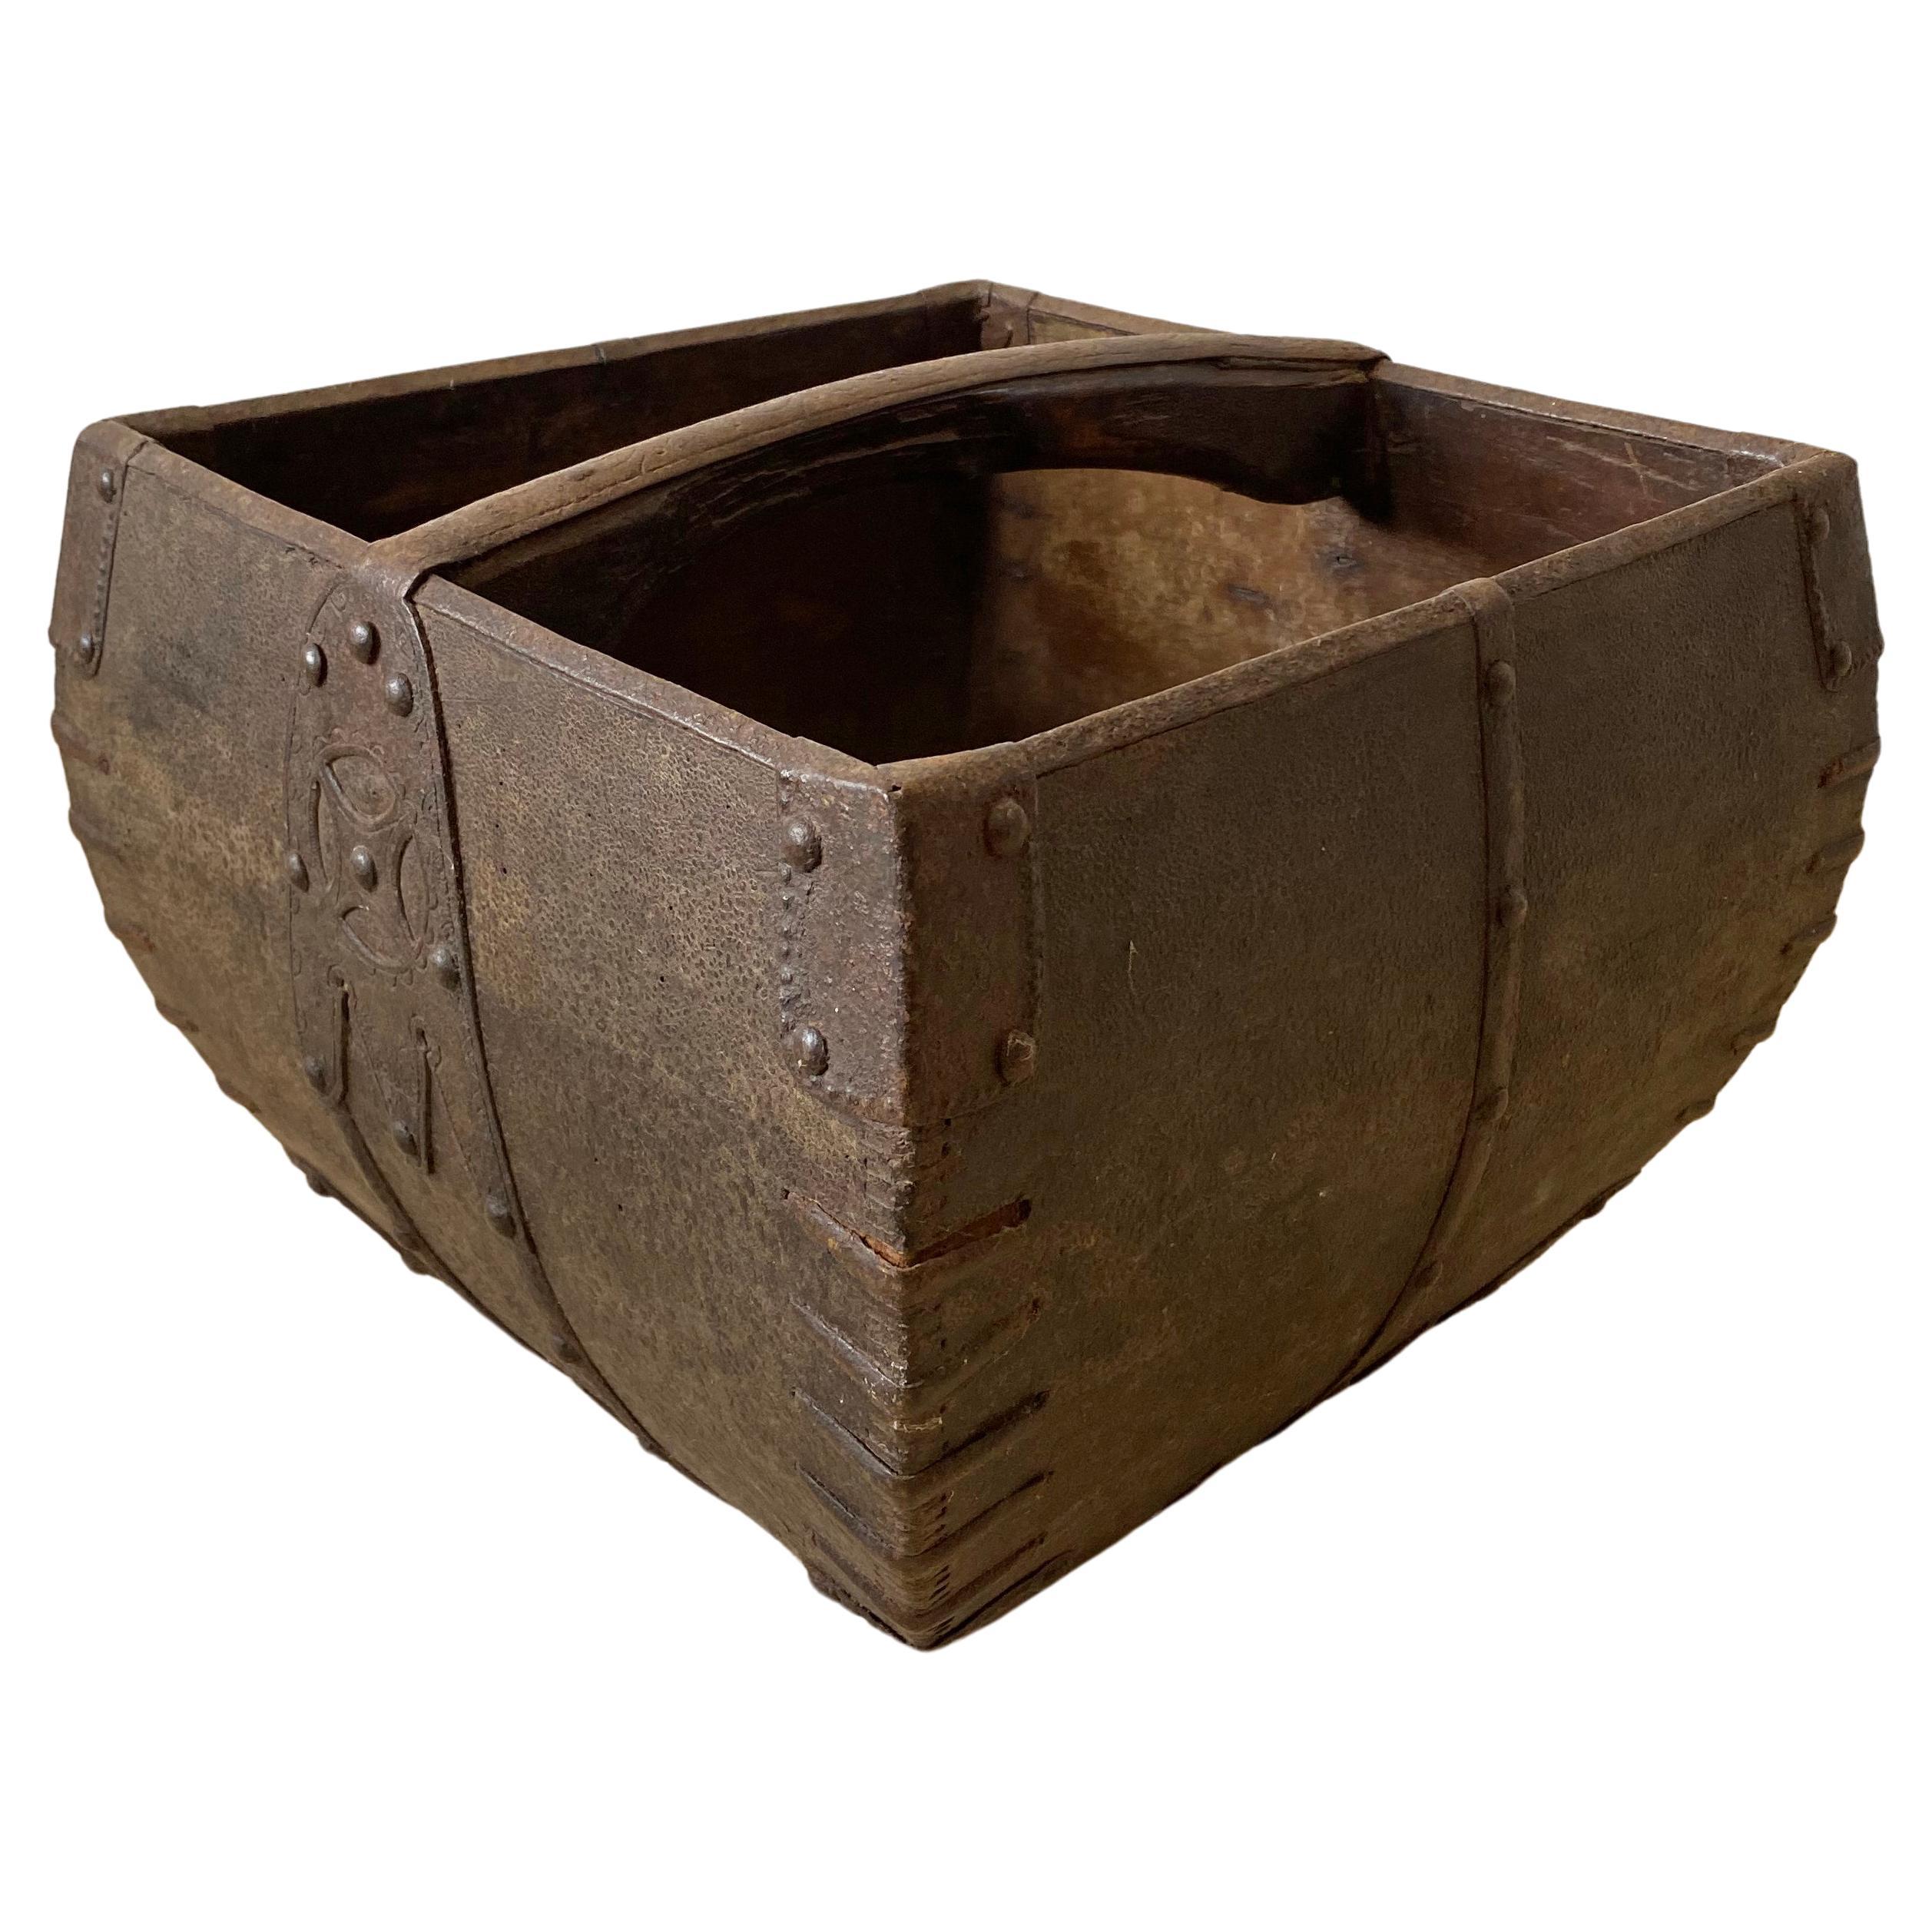 Chinese Rice Measure Basket with Engraved Iron Fittings, Early 20th Century